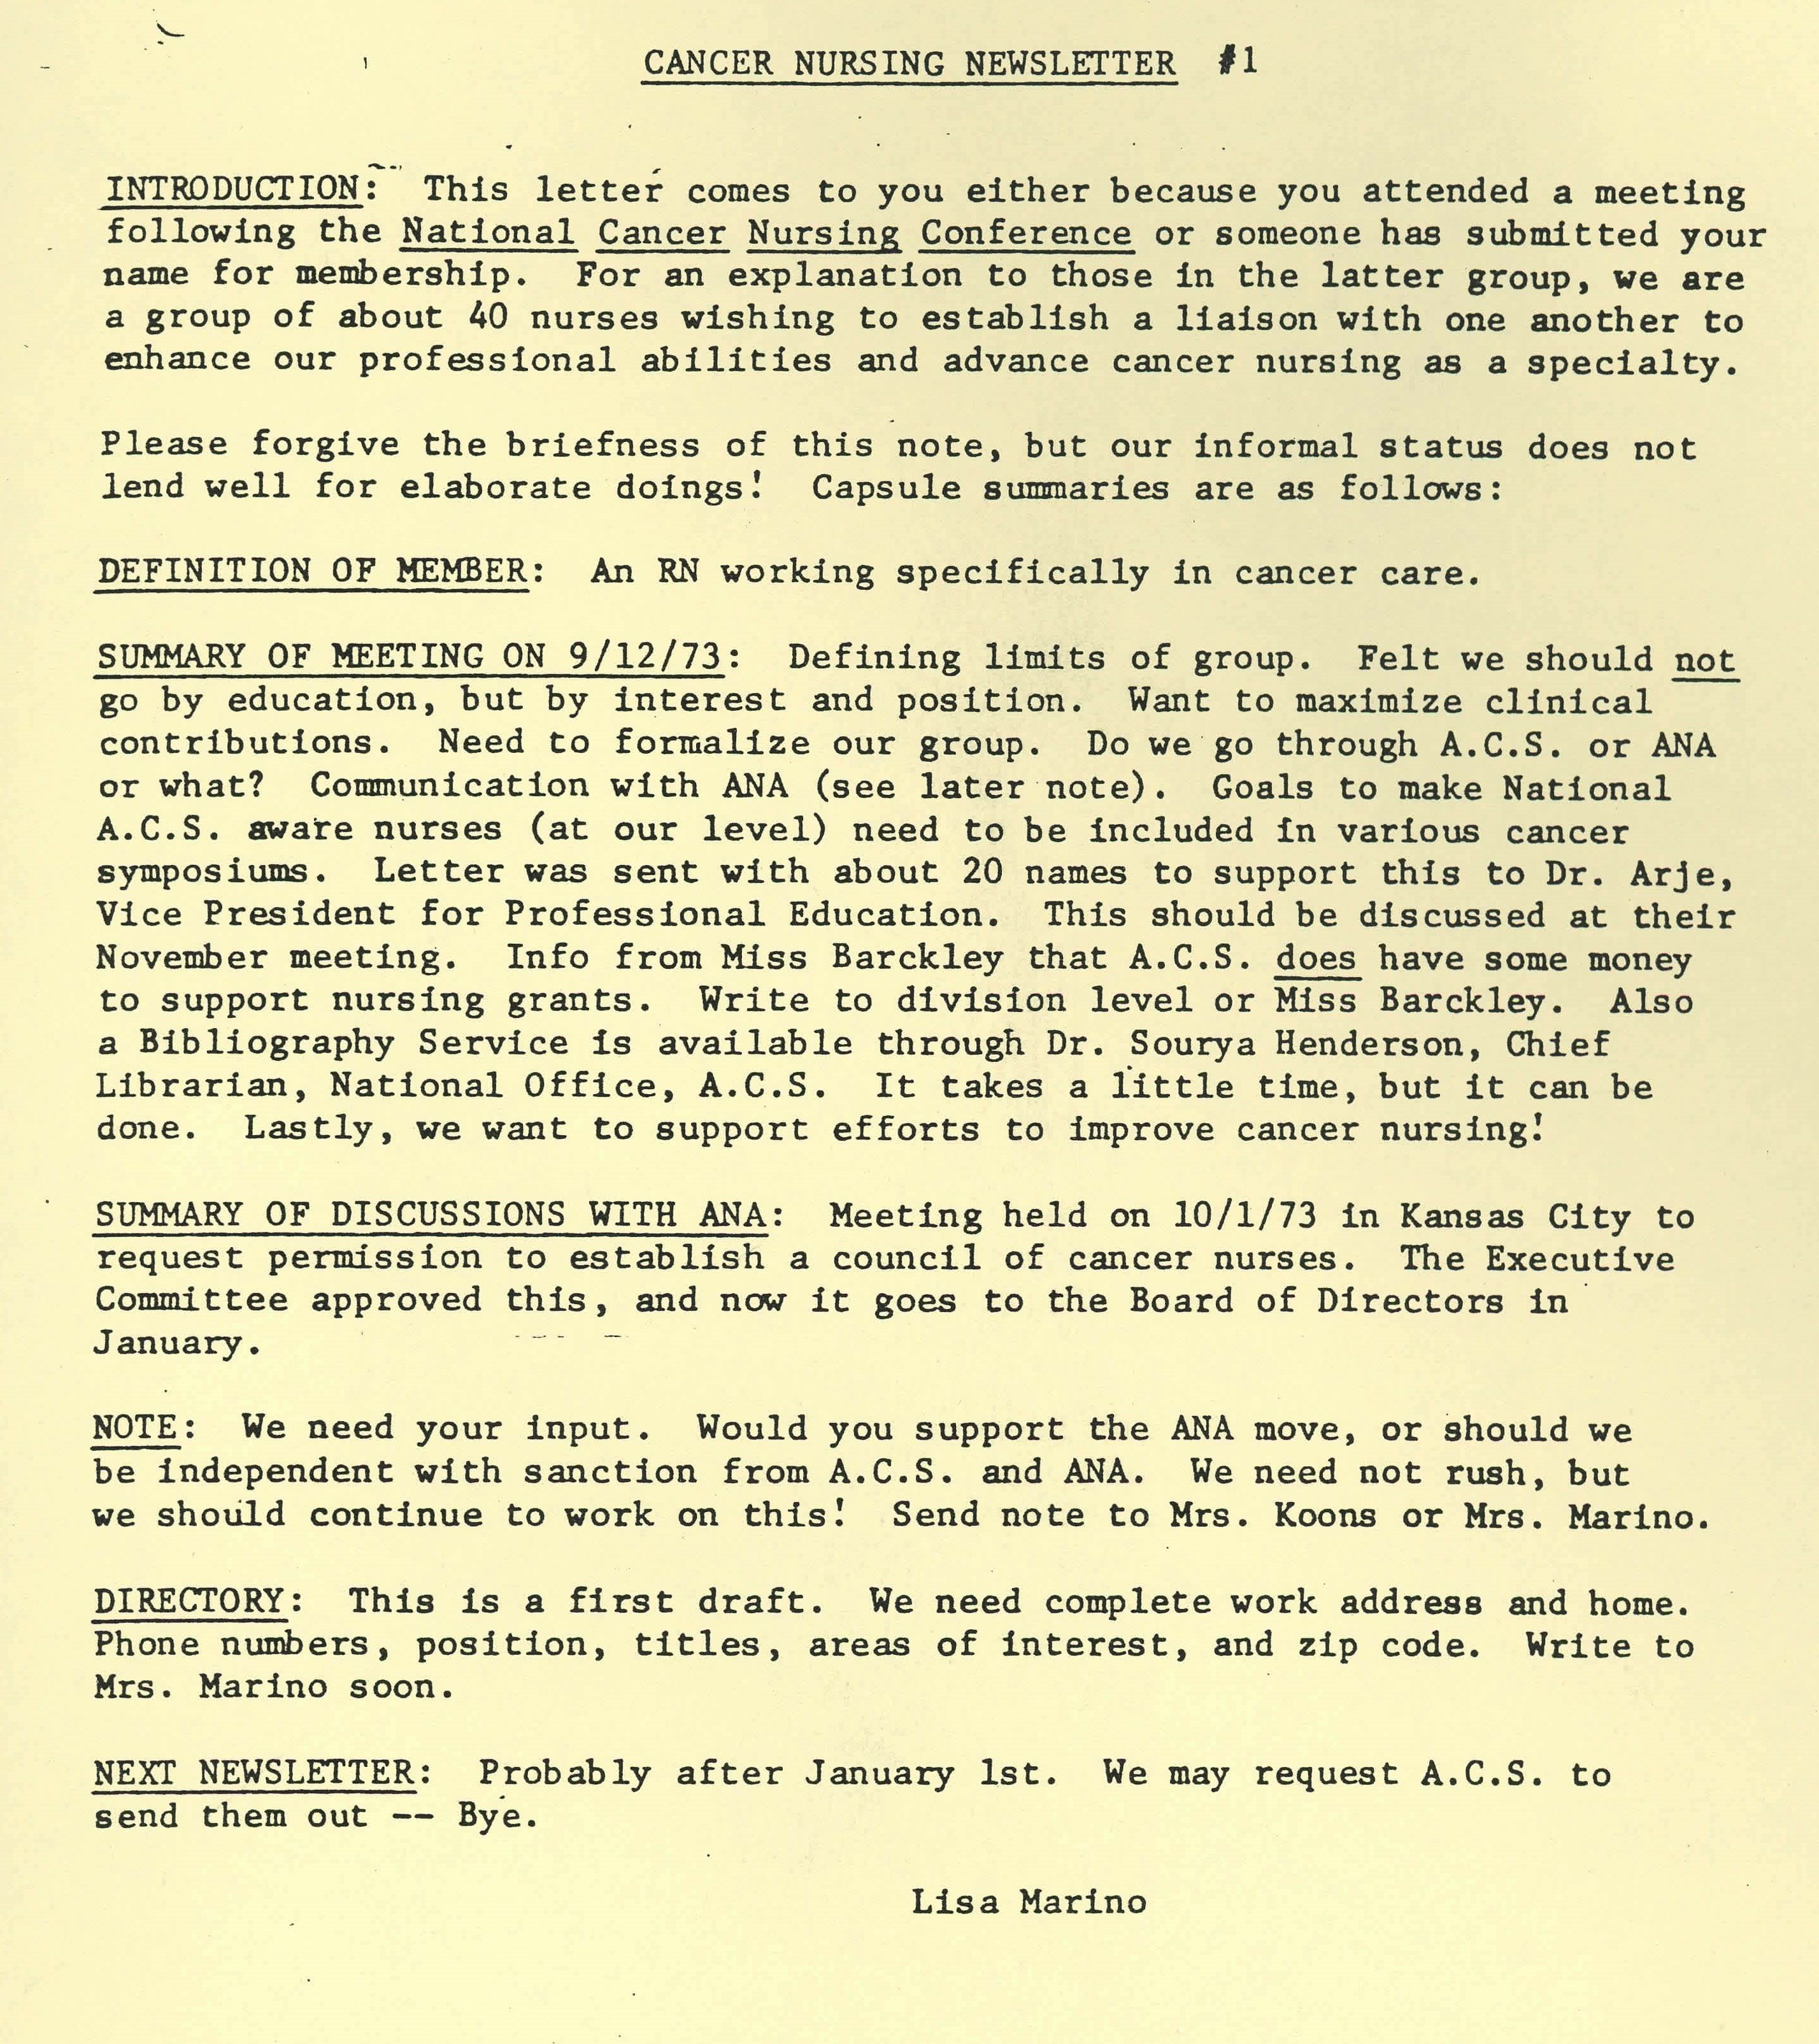 Scanned image of aged, yellowed document with typed text of the first cancer nursing newsletter